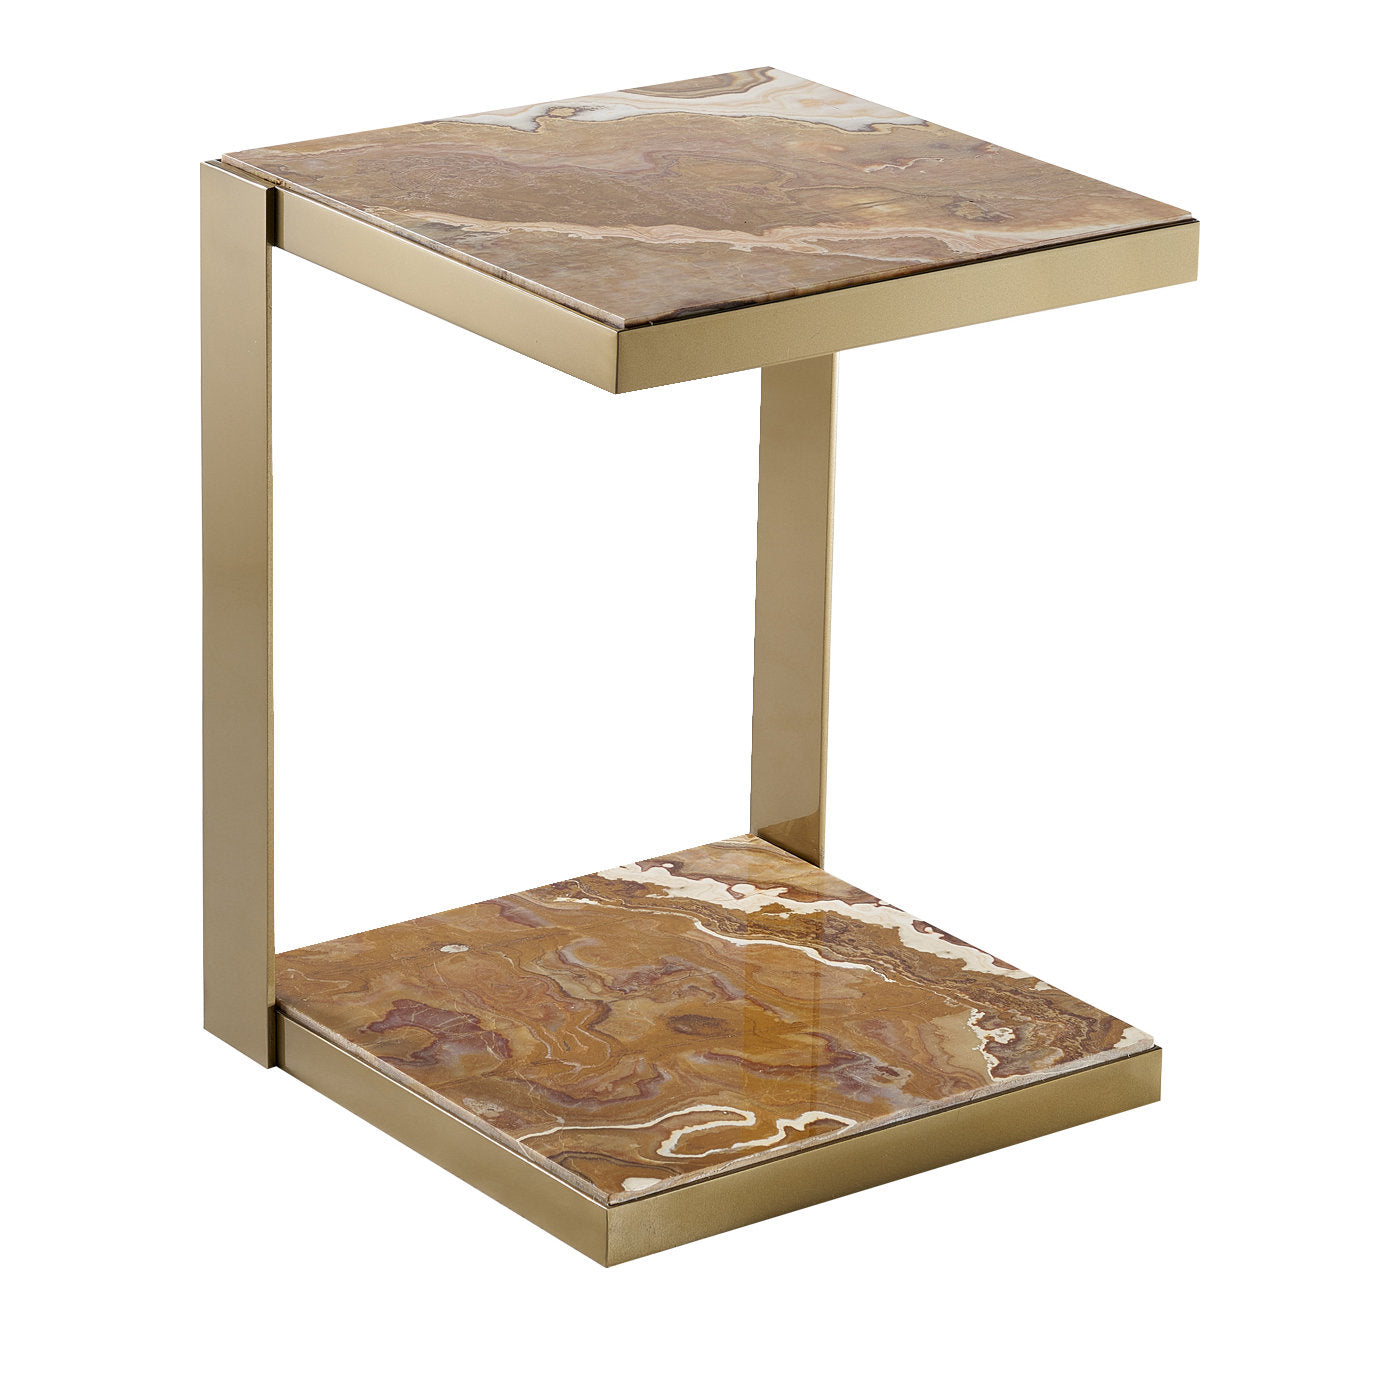 Amaranta Small Side Table Red Onyx - Main view